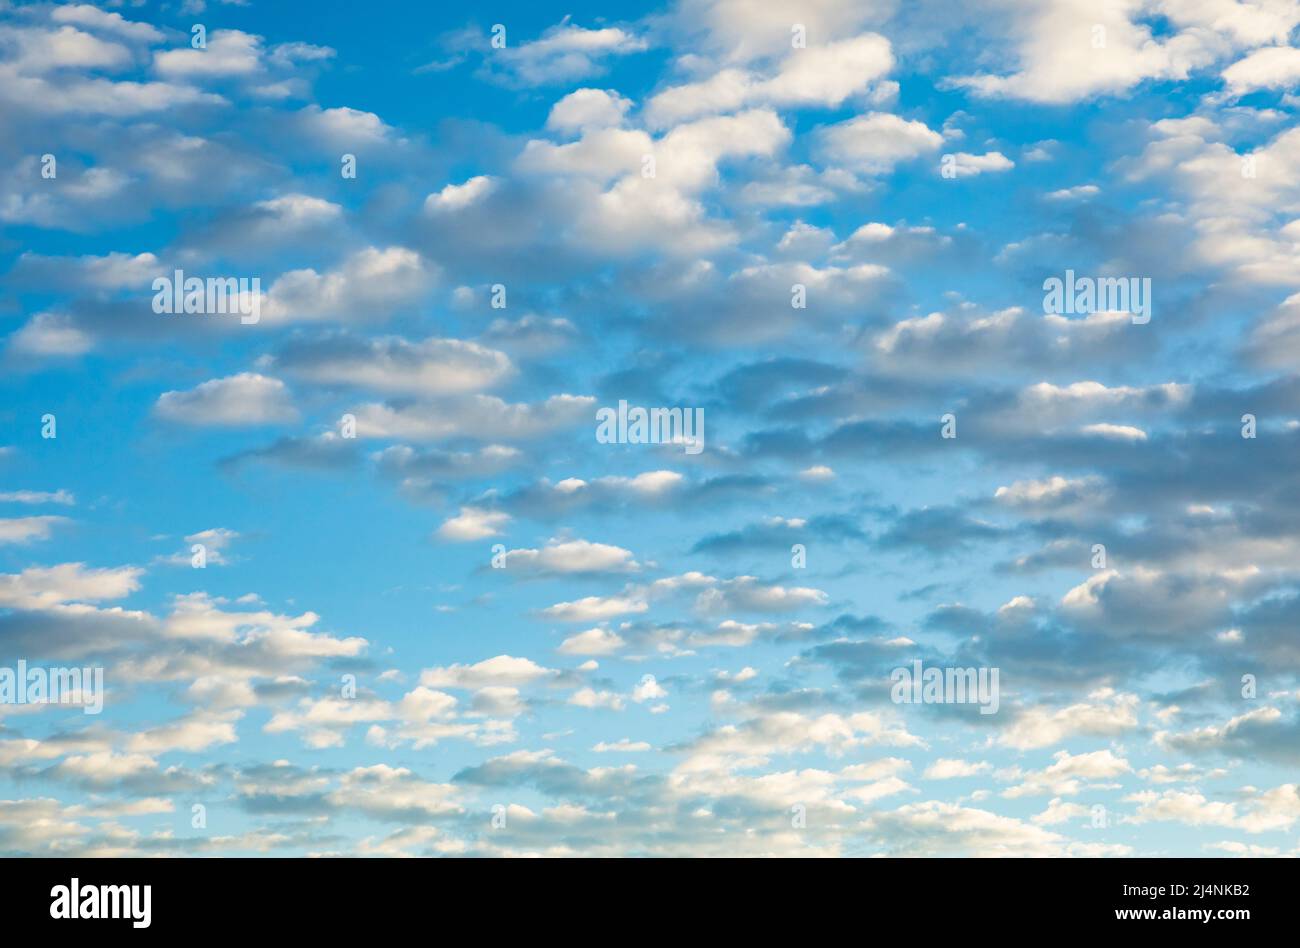 Happy Tuesday Spanish Sign Clouds Sky Stock Photo 217156597